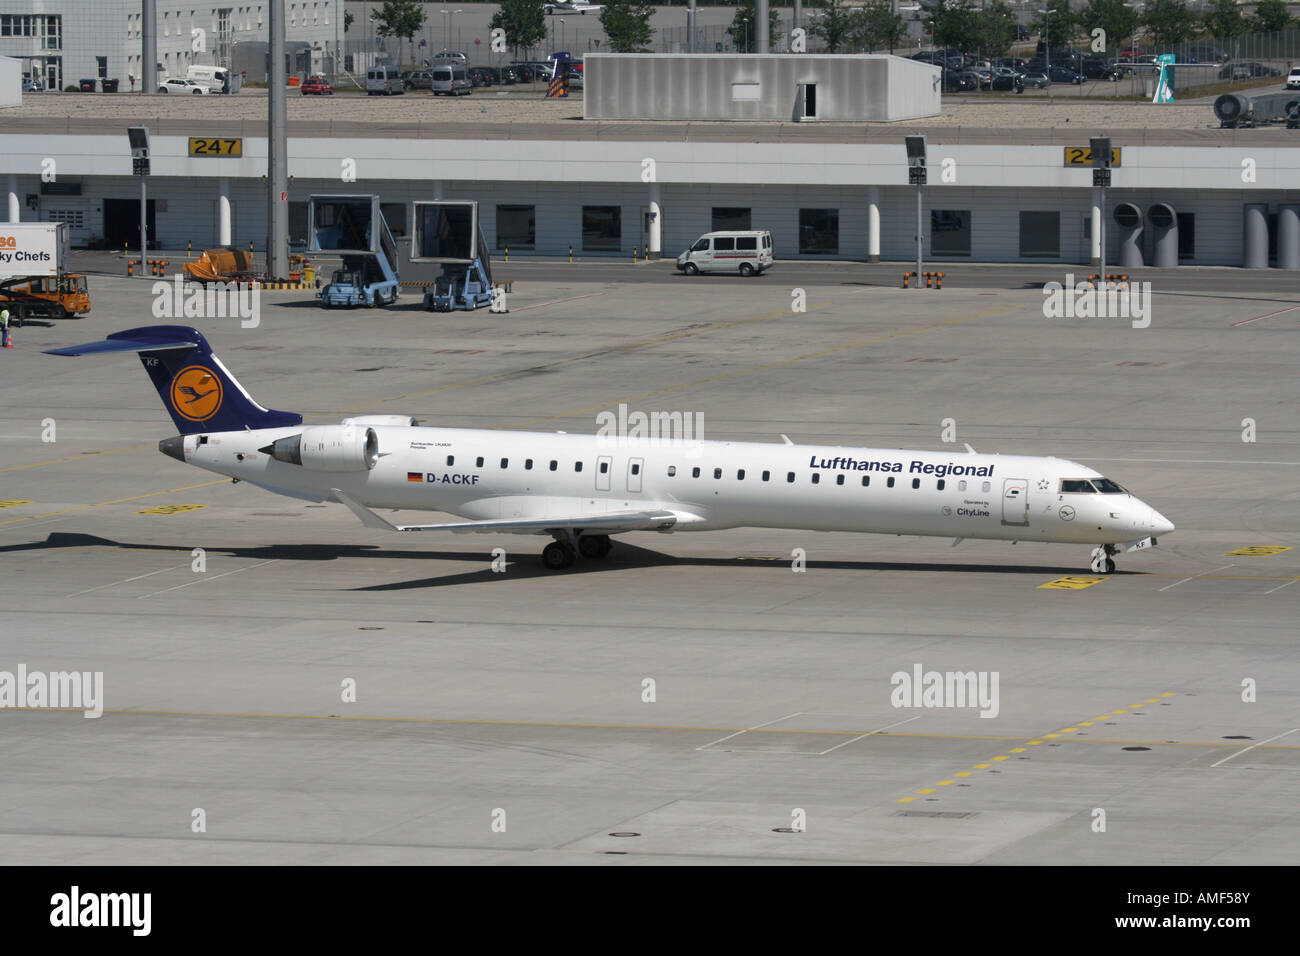 Bombardier CRJ900 operated by Lufthansa Regional taxiing at Munich Airport Stock Photo